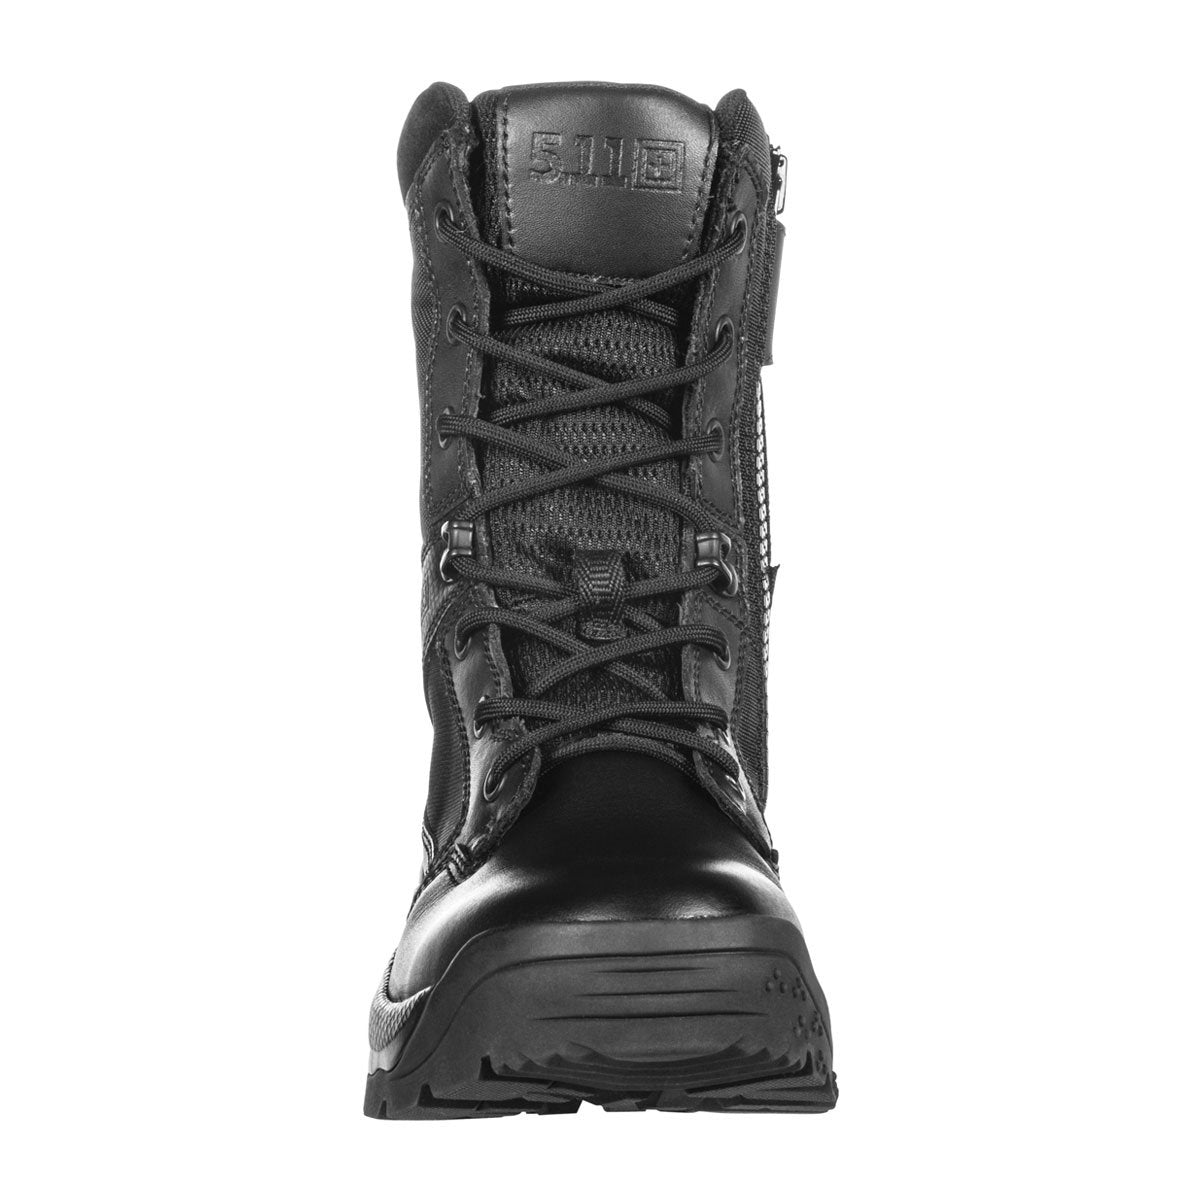 5.11 Tactical Womens ATAC 2.0 8 Inches Boot Footwear 5.11 Tactical Tactical Gear Supplier Tactical Distributors Australia